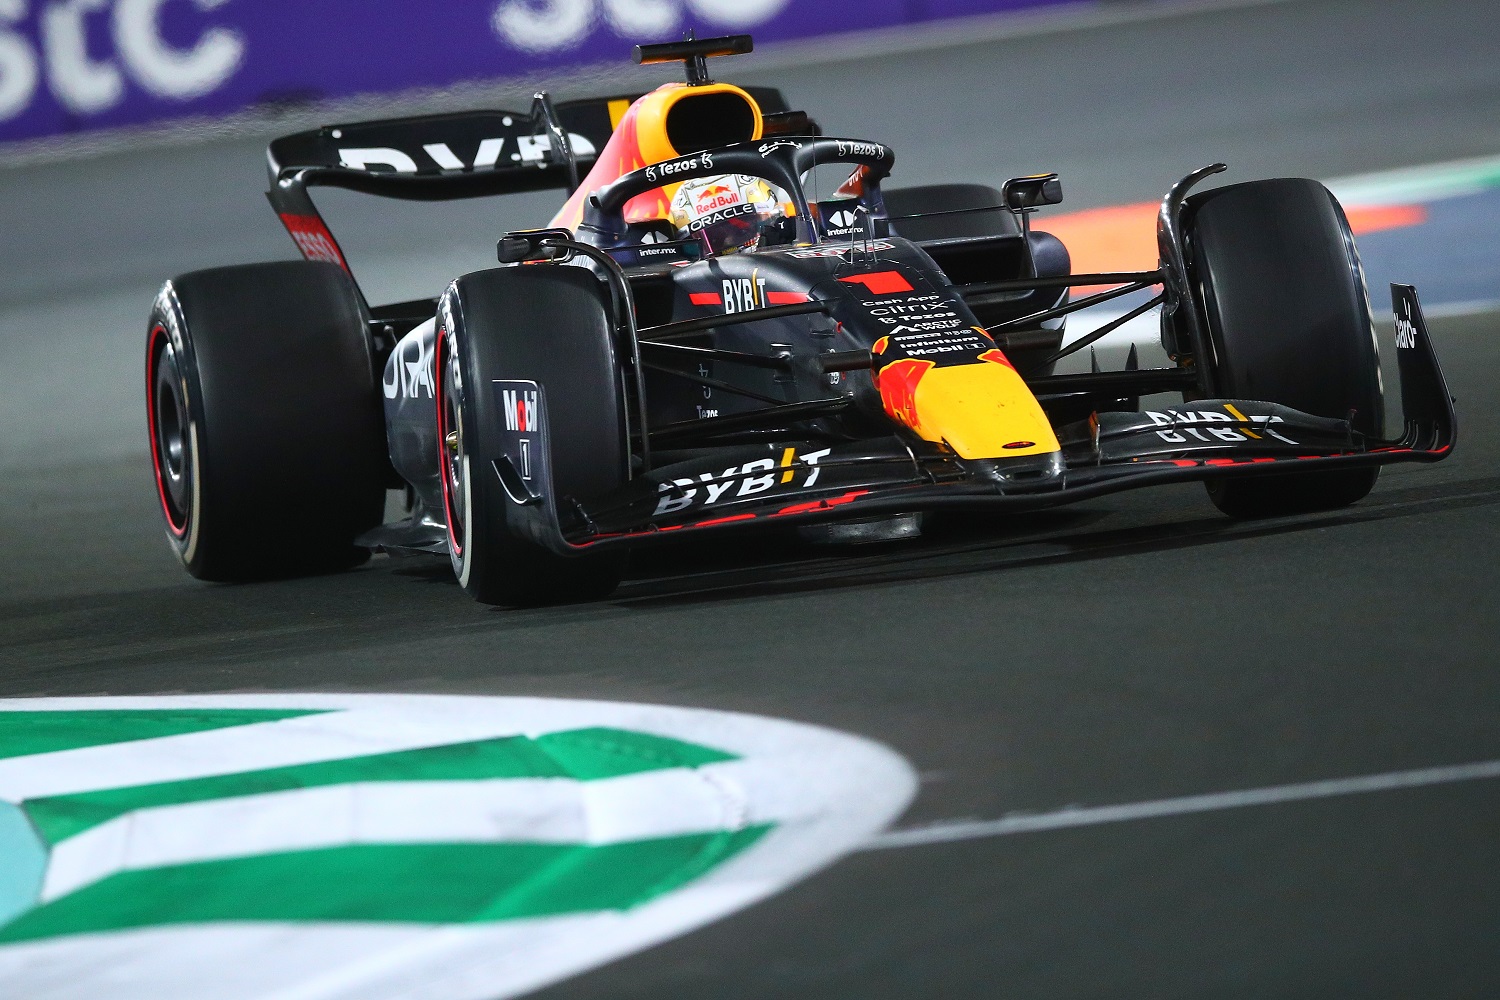 :Max Verstappen during the Formula 1 Grand Prix of Saudi Arabia at the Jeddah Corniche Circuit on March 27, 2022 in Jeddah, Saudi Arabia.| Eric Alonso/Getty Images